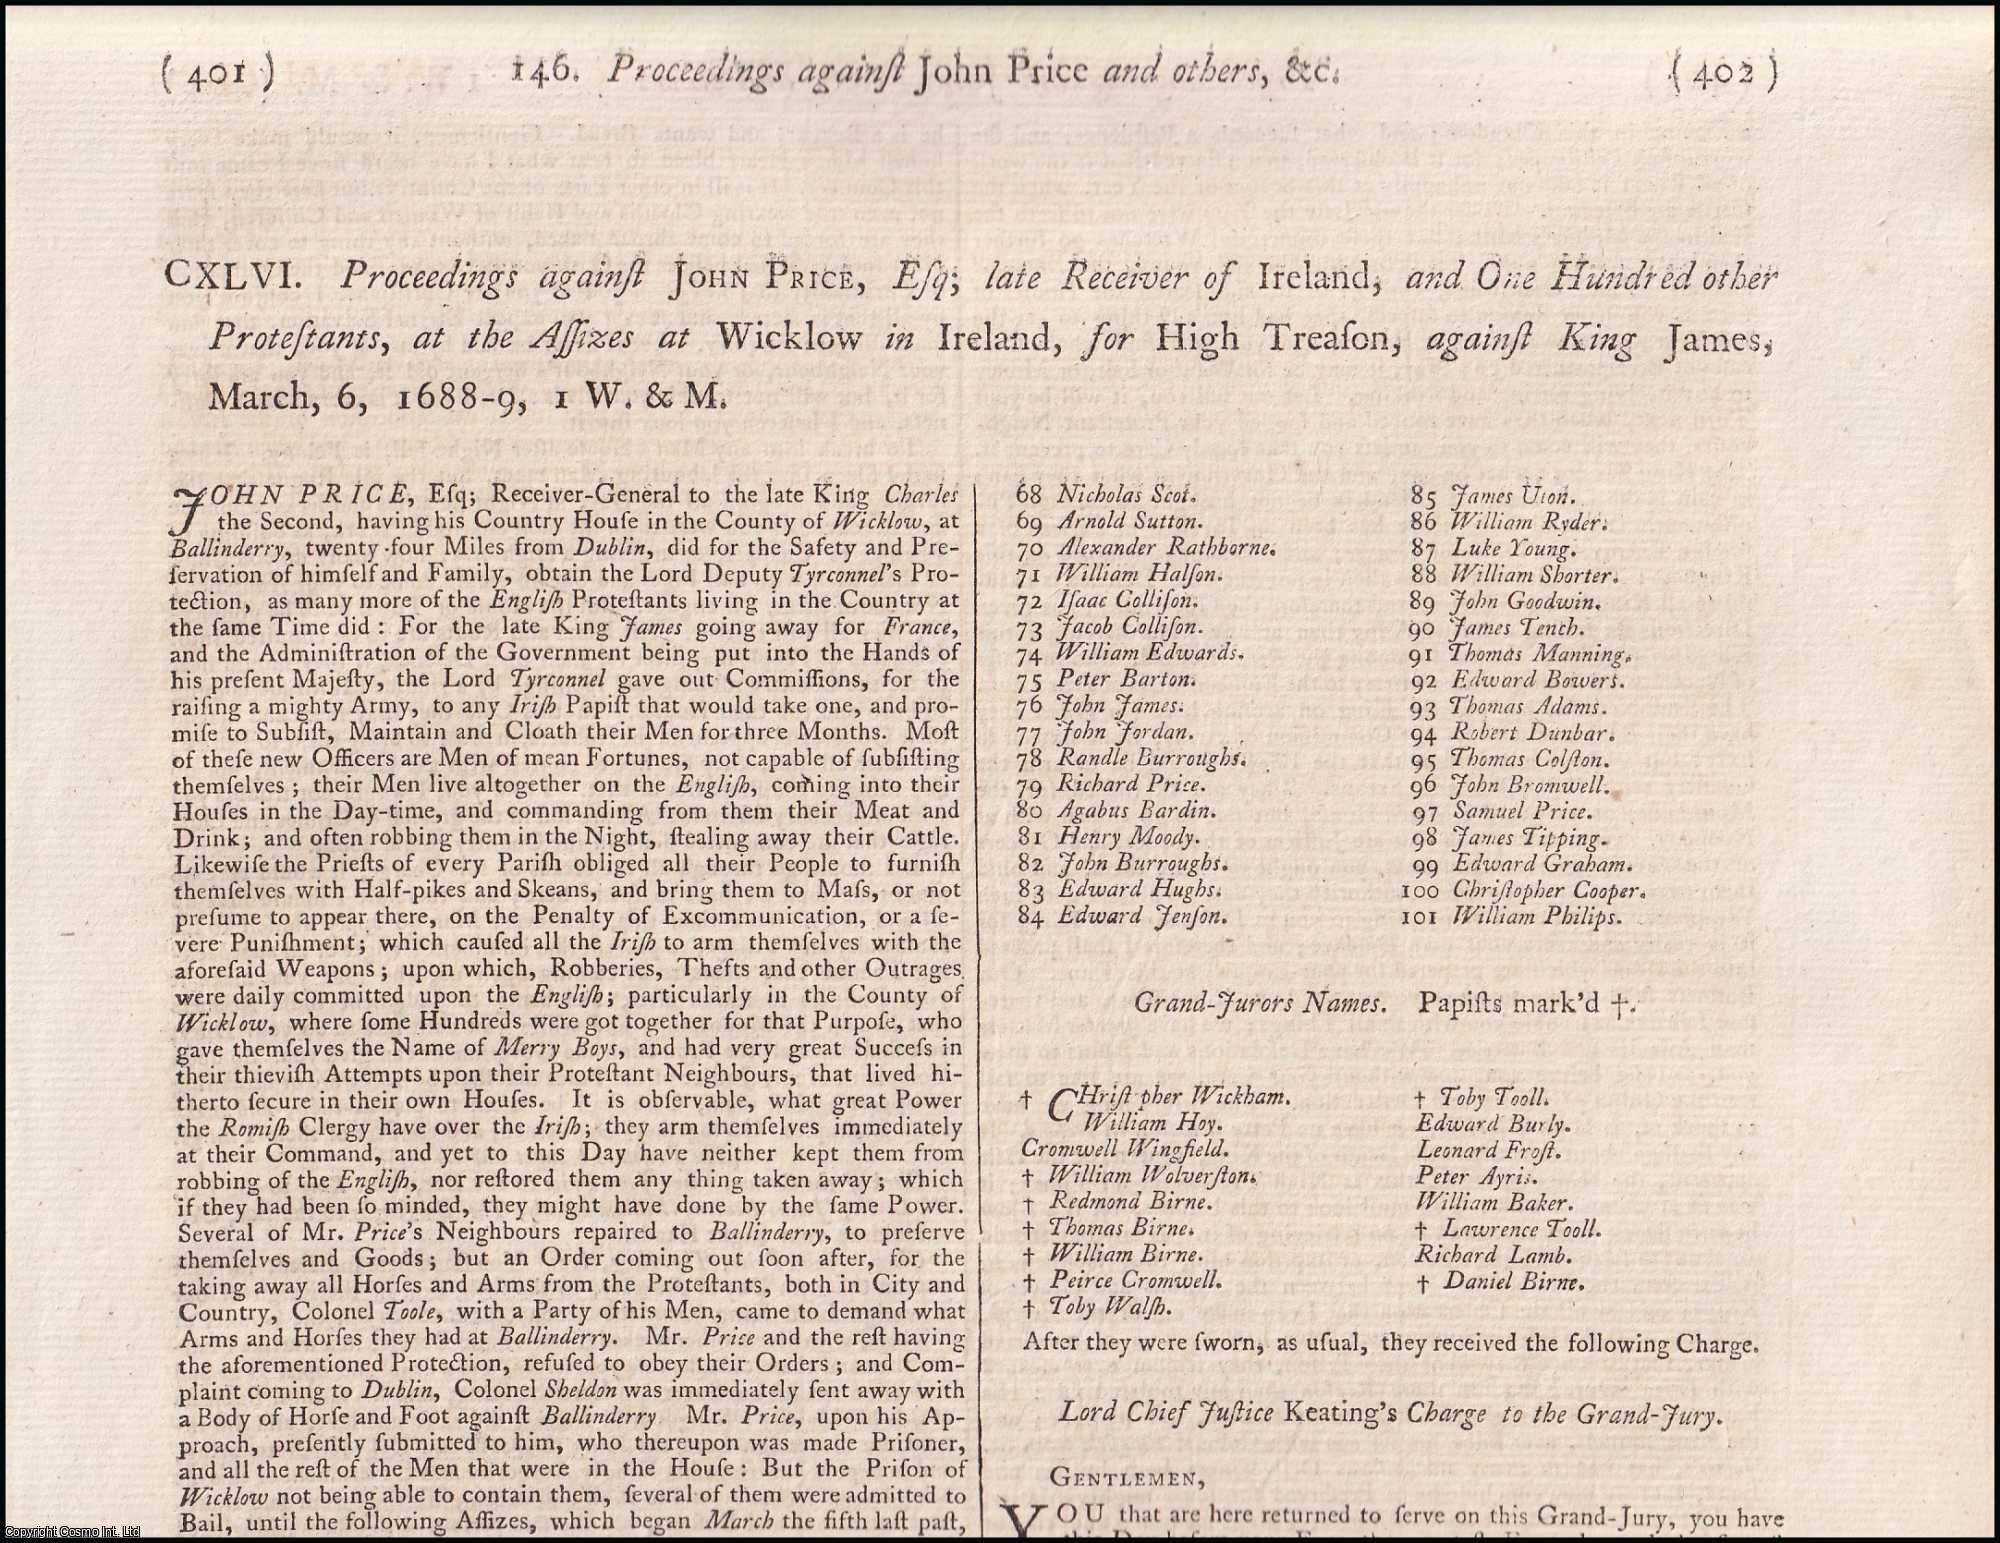 [Trial]. - Proceedings against John Price, Esq; late Receiver of Ireland, & One Hundred other Protestants, at the Assizes at Wicklow in Ireland for High Treason, against King James, March, 6, 1688-9. An original report from the Collected State Trials.